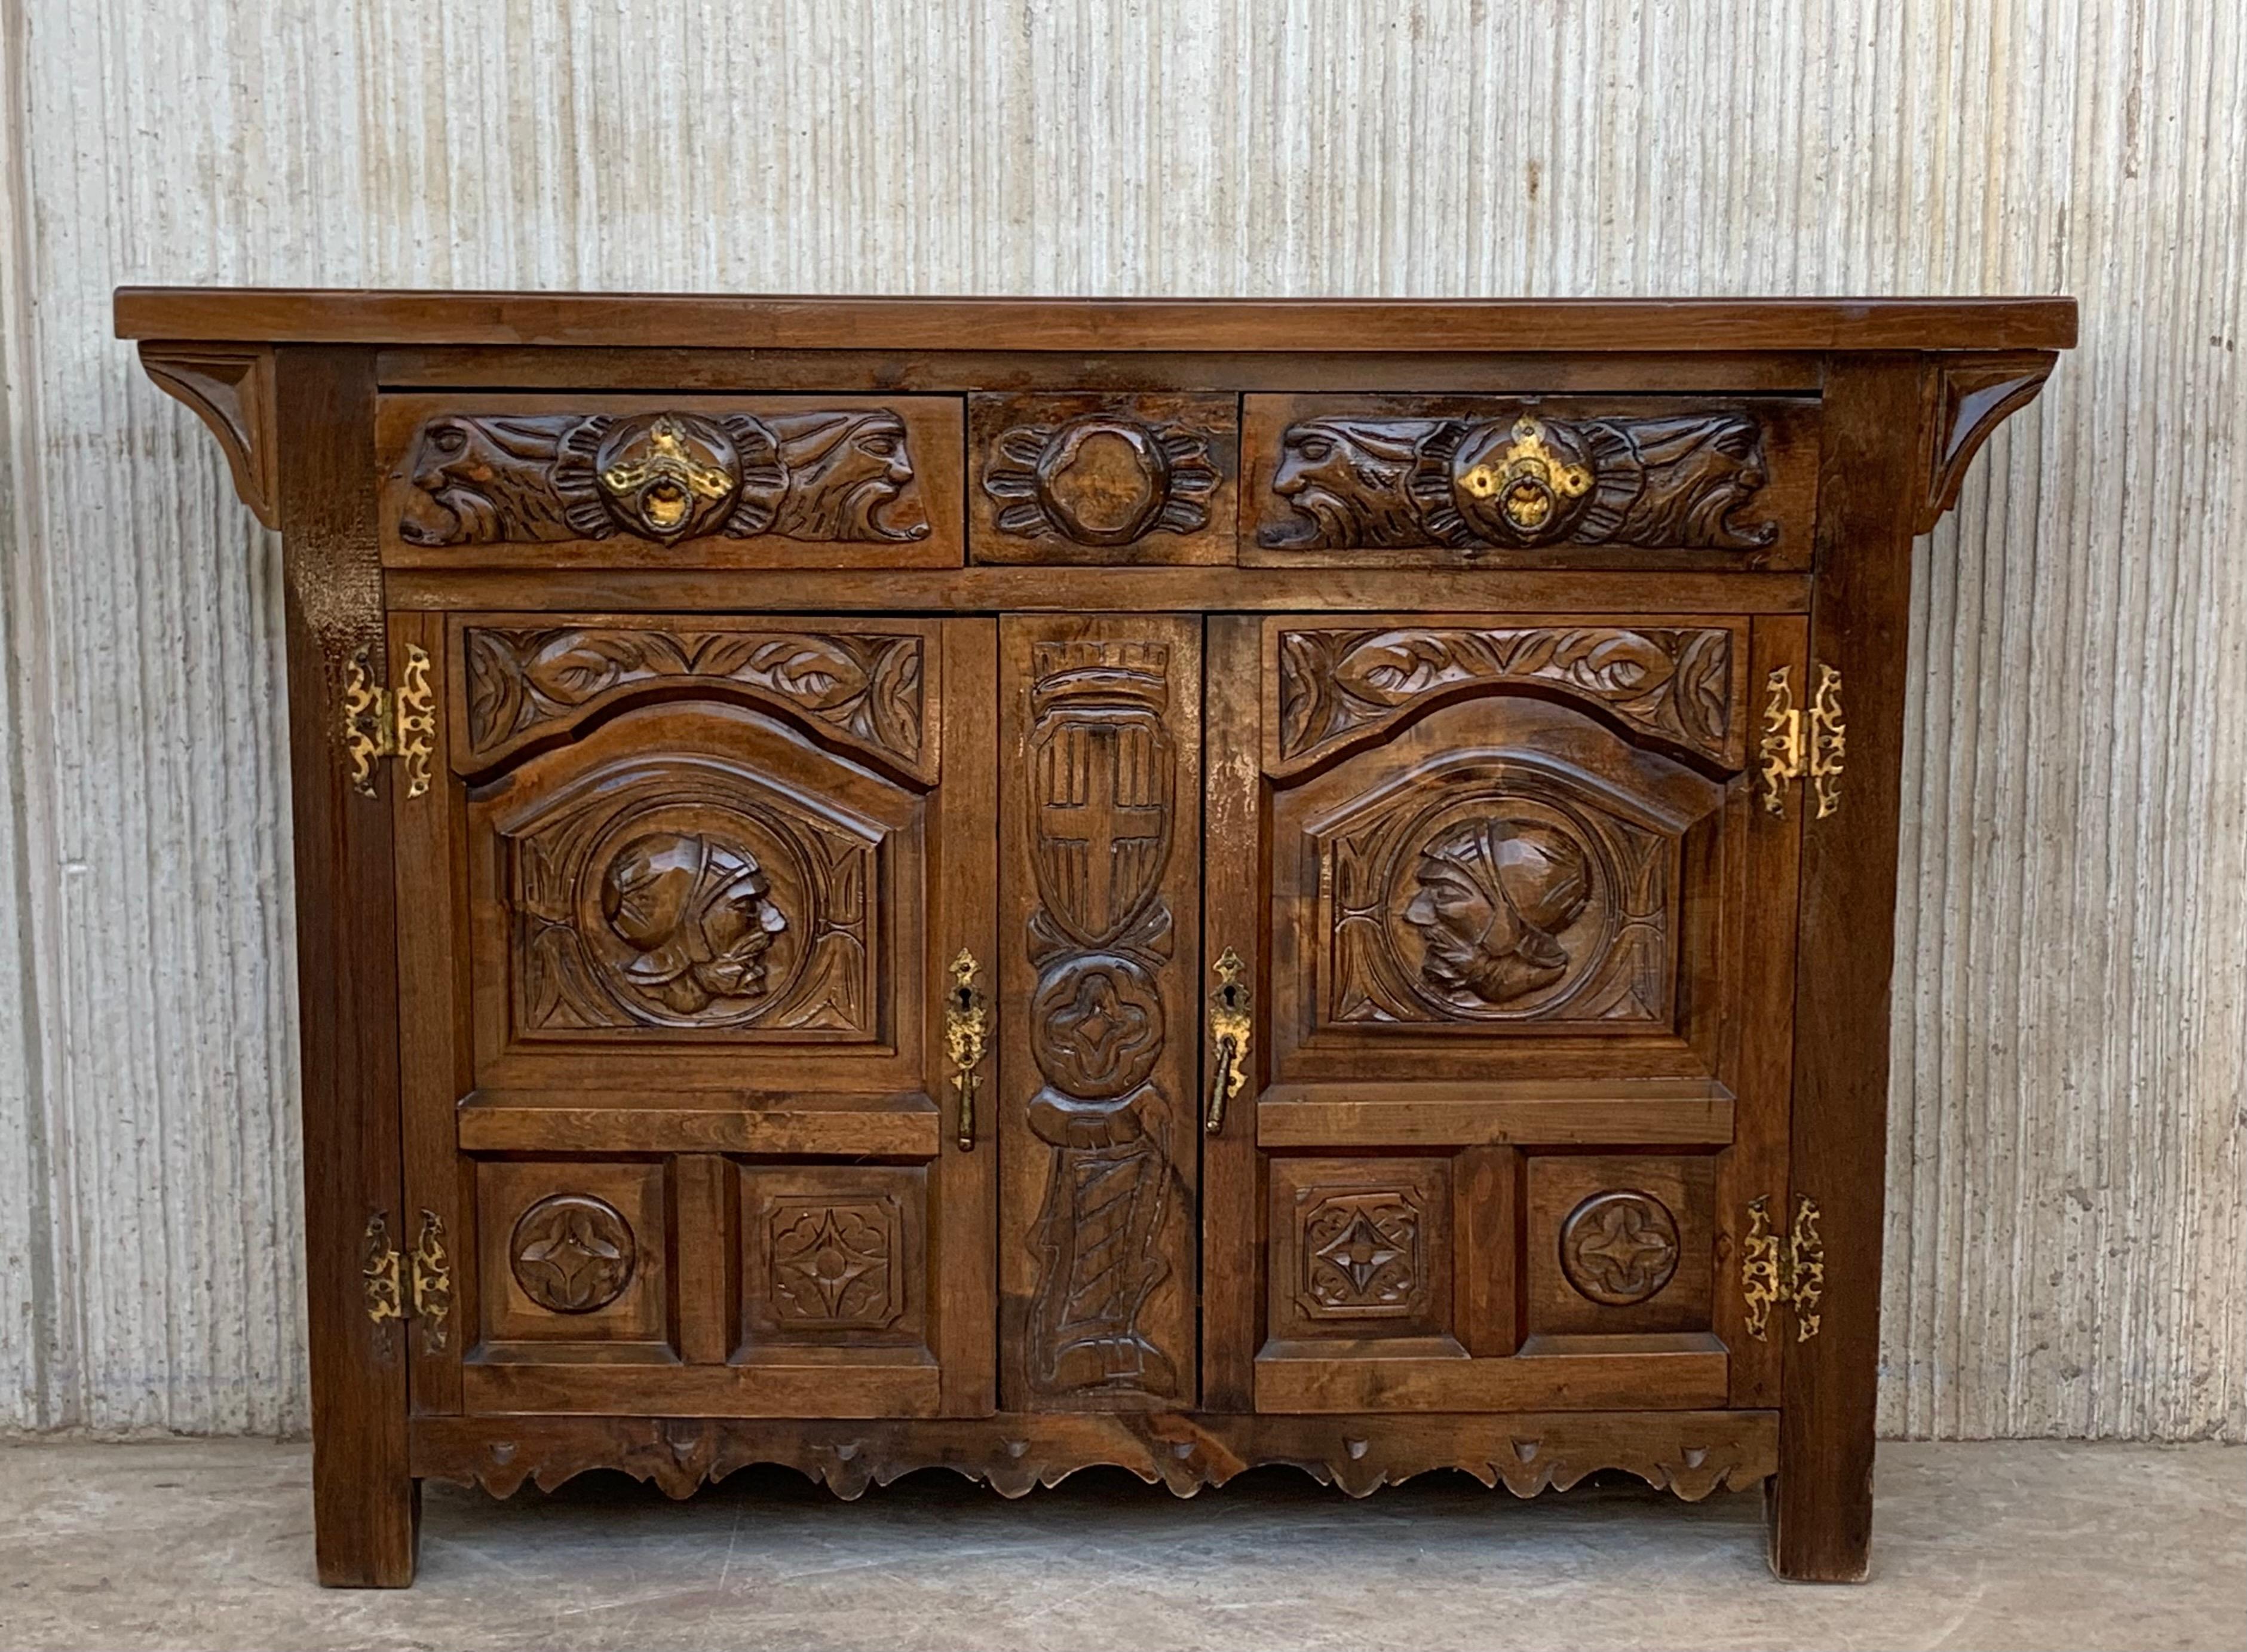 Very good quality carved Spanish cabinet cupboard, circa 1880. Beautifully carved in walnut, with good color and patina. Features six carved panels on the doors and two drawers with carved decoration with acanthus leaves and geometrical figures.